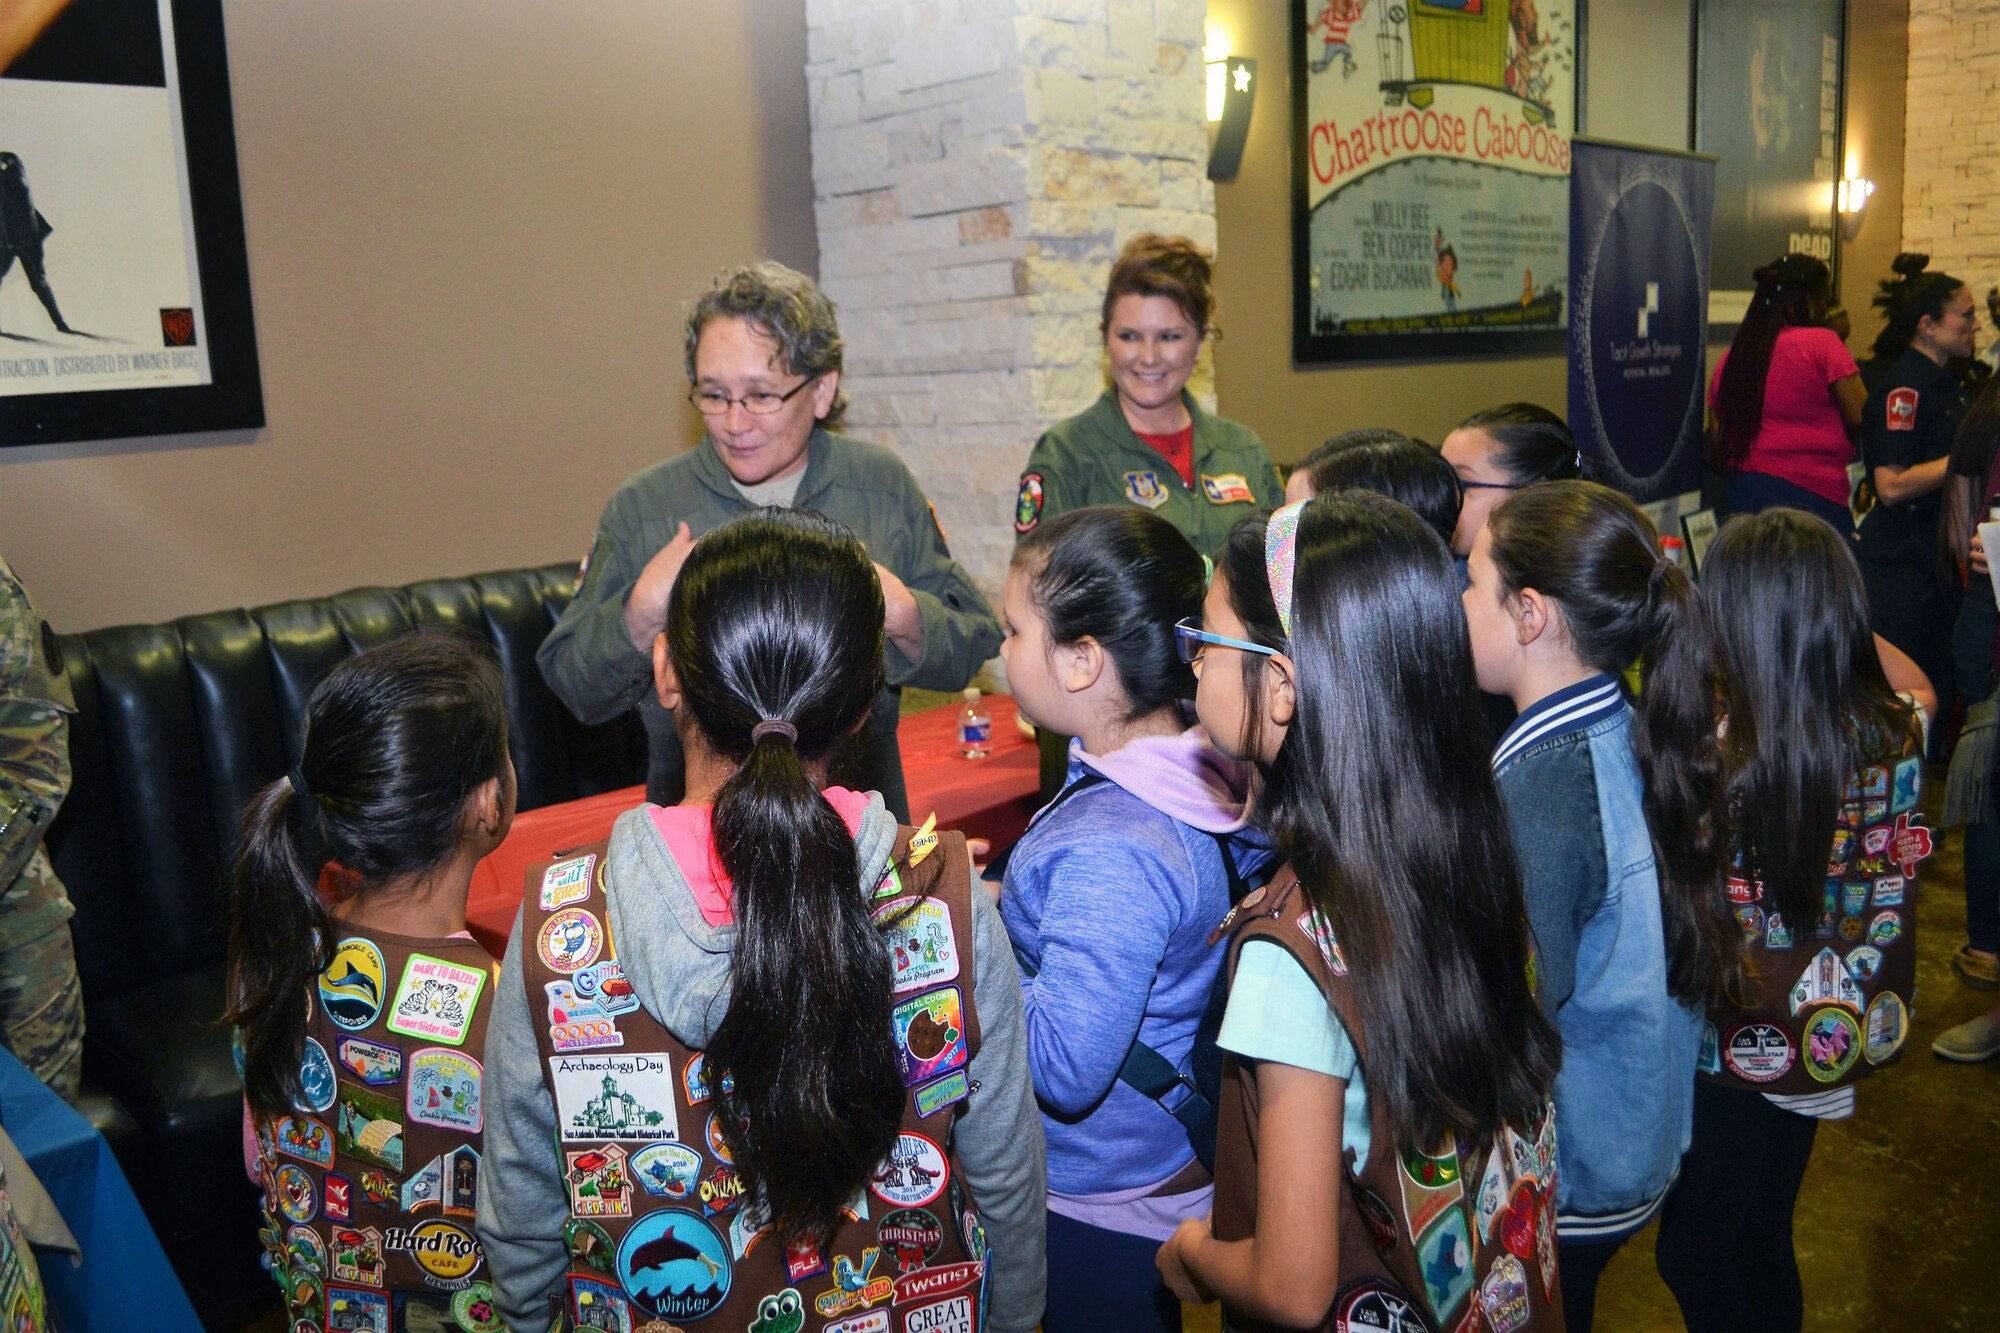 ech. Sgt. Debra Harper (left), 68th Airlift Squadron loadmaster, and Lt. Col. Kari Hill, 433rd Operations Support Squadron commander/pilot, both with Joint Base San Antonio-Lackland, Texas, talk with girls attending the “Marvelous Women Don’t Need Capes” event.